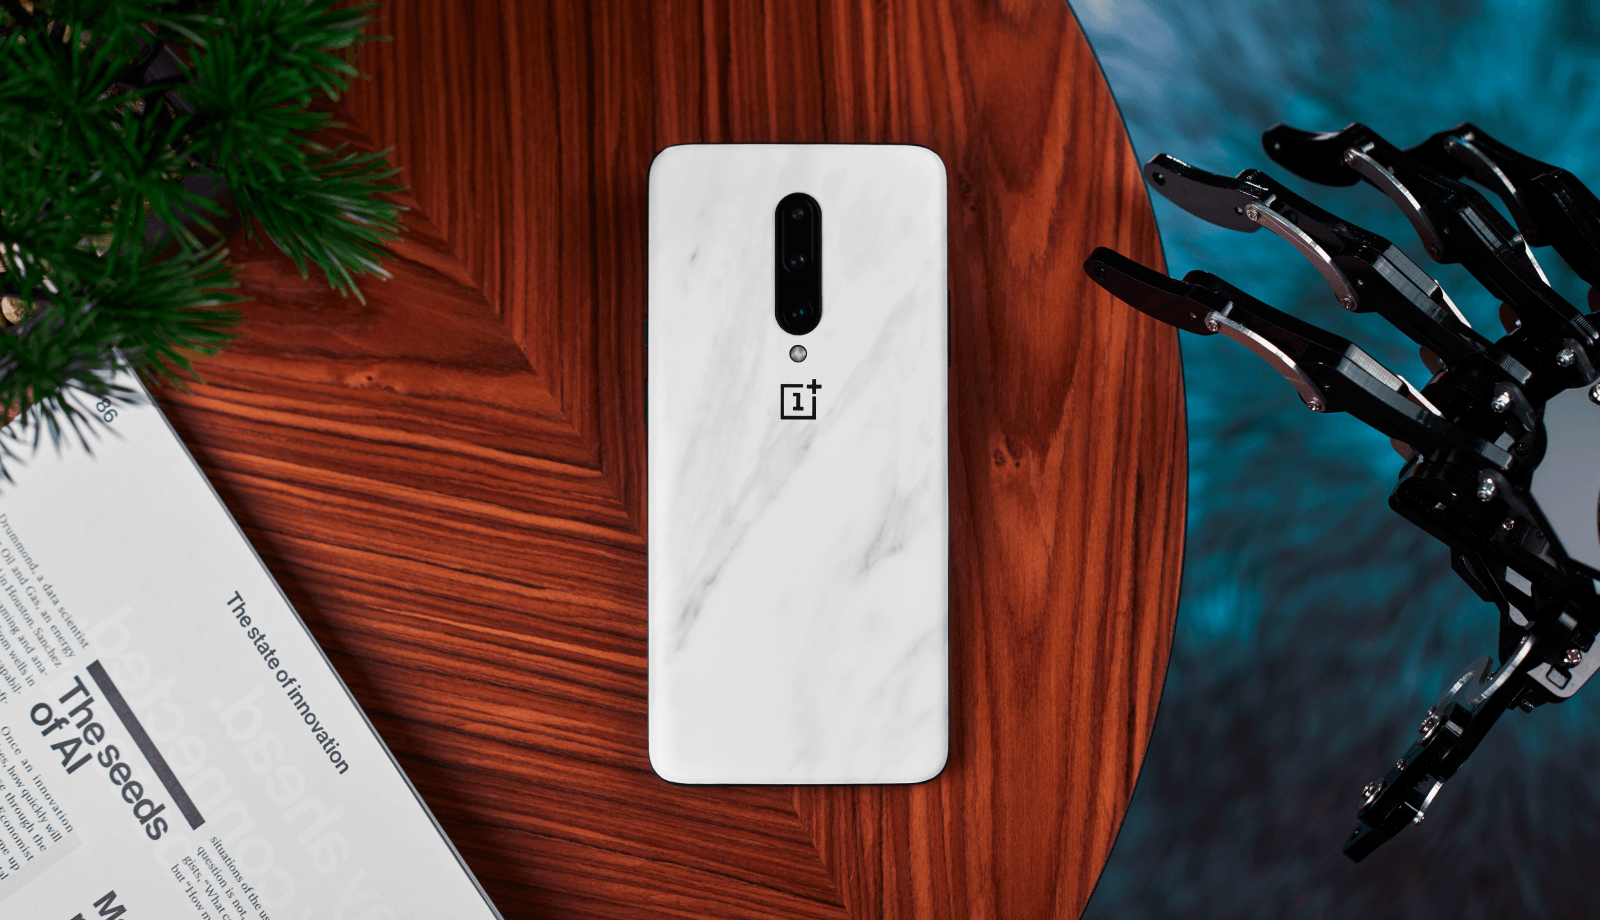 Download the official OnePlus 7 Pro wallpaper here